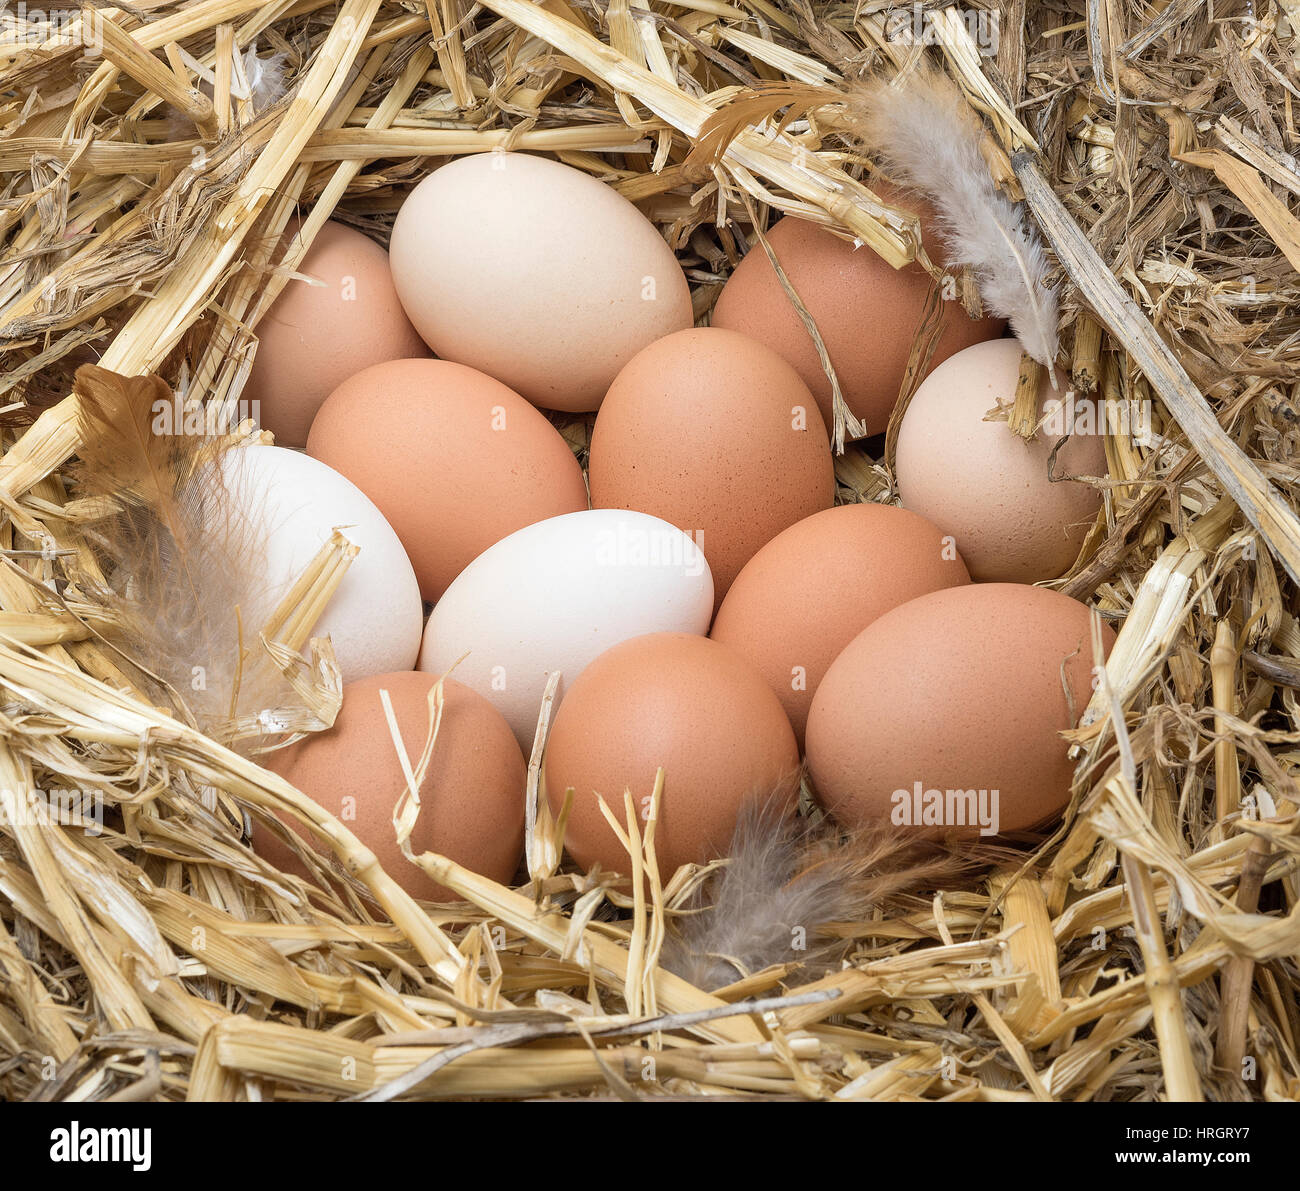 Brown and white chicken eggs with feathers in a straw nest. Stock Photo